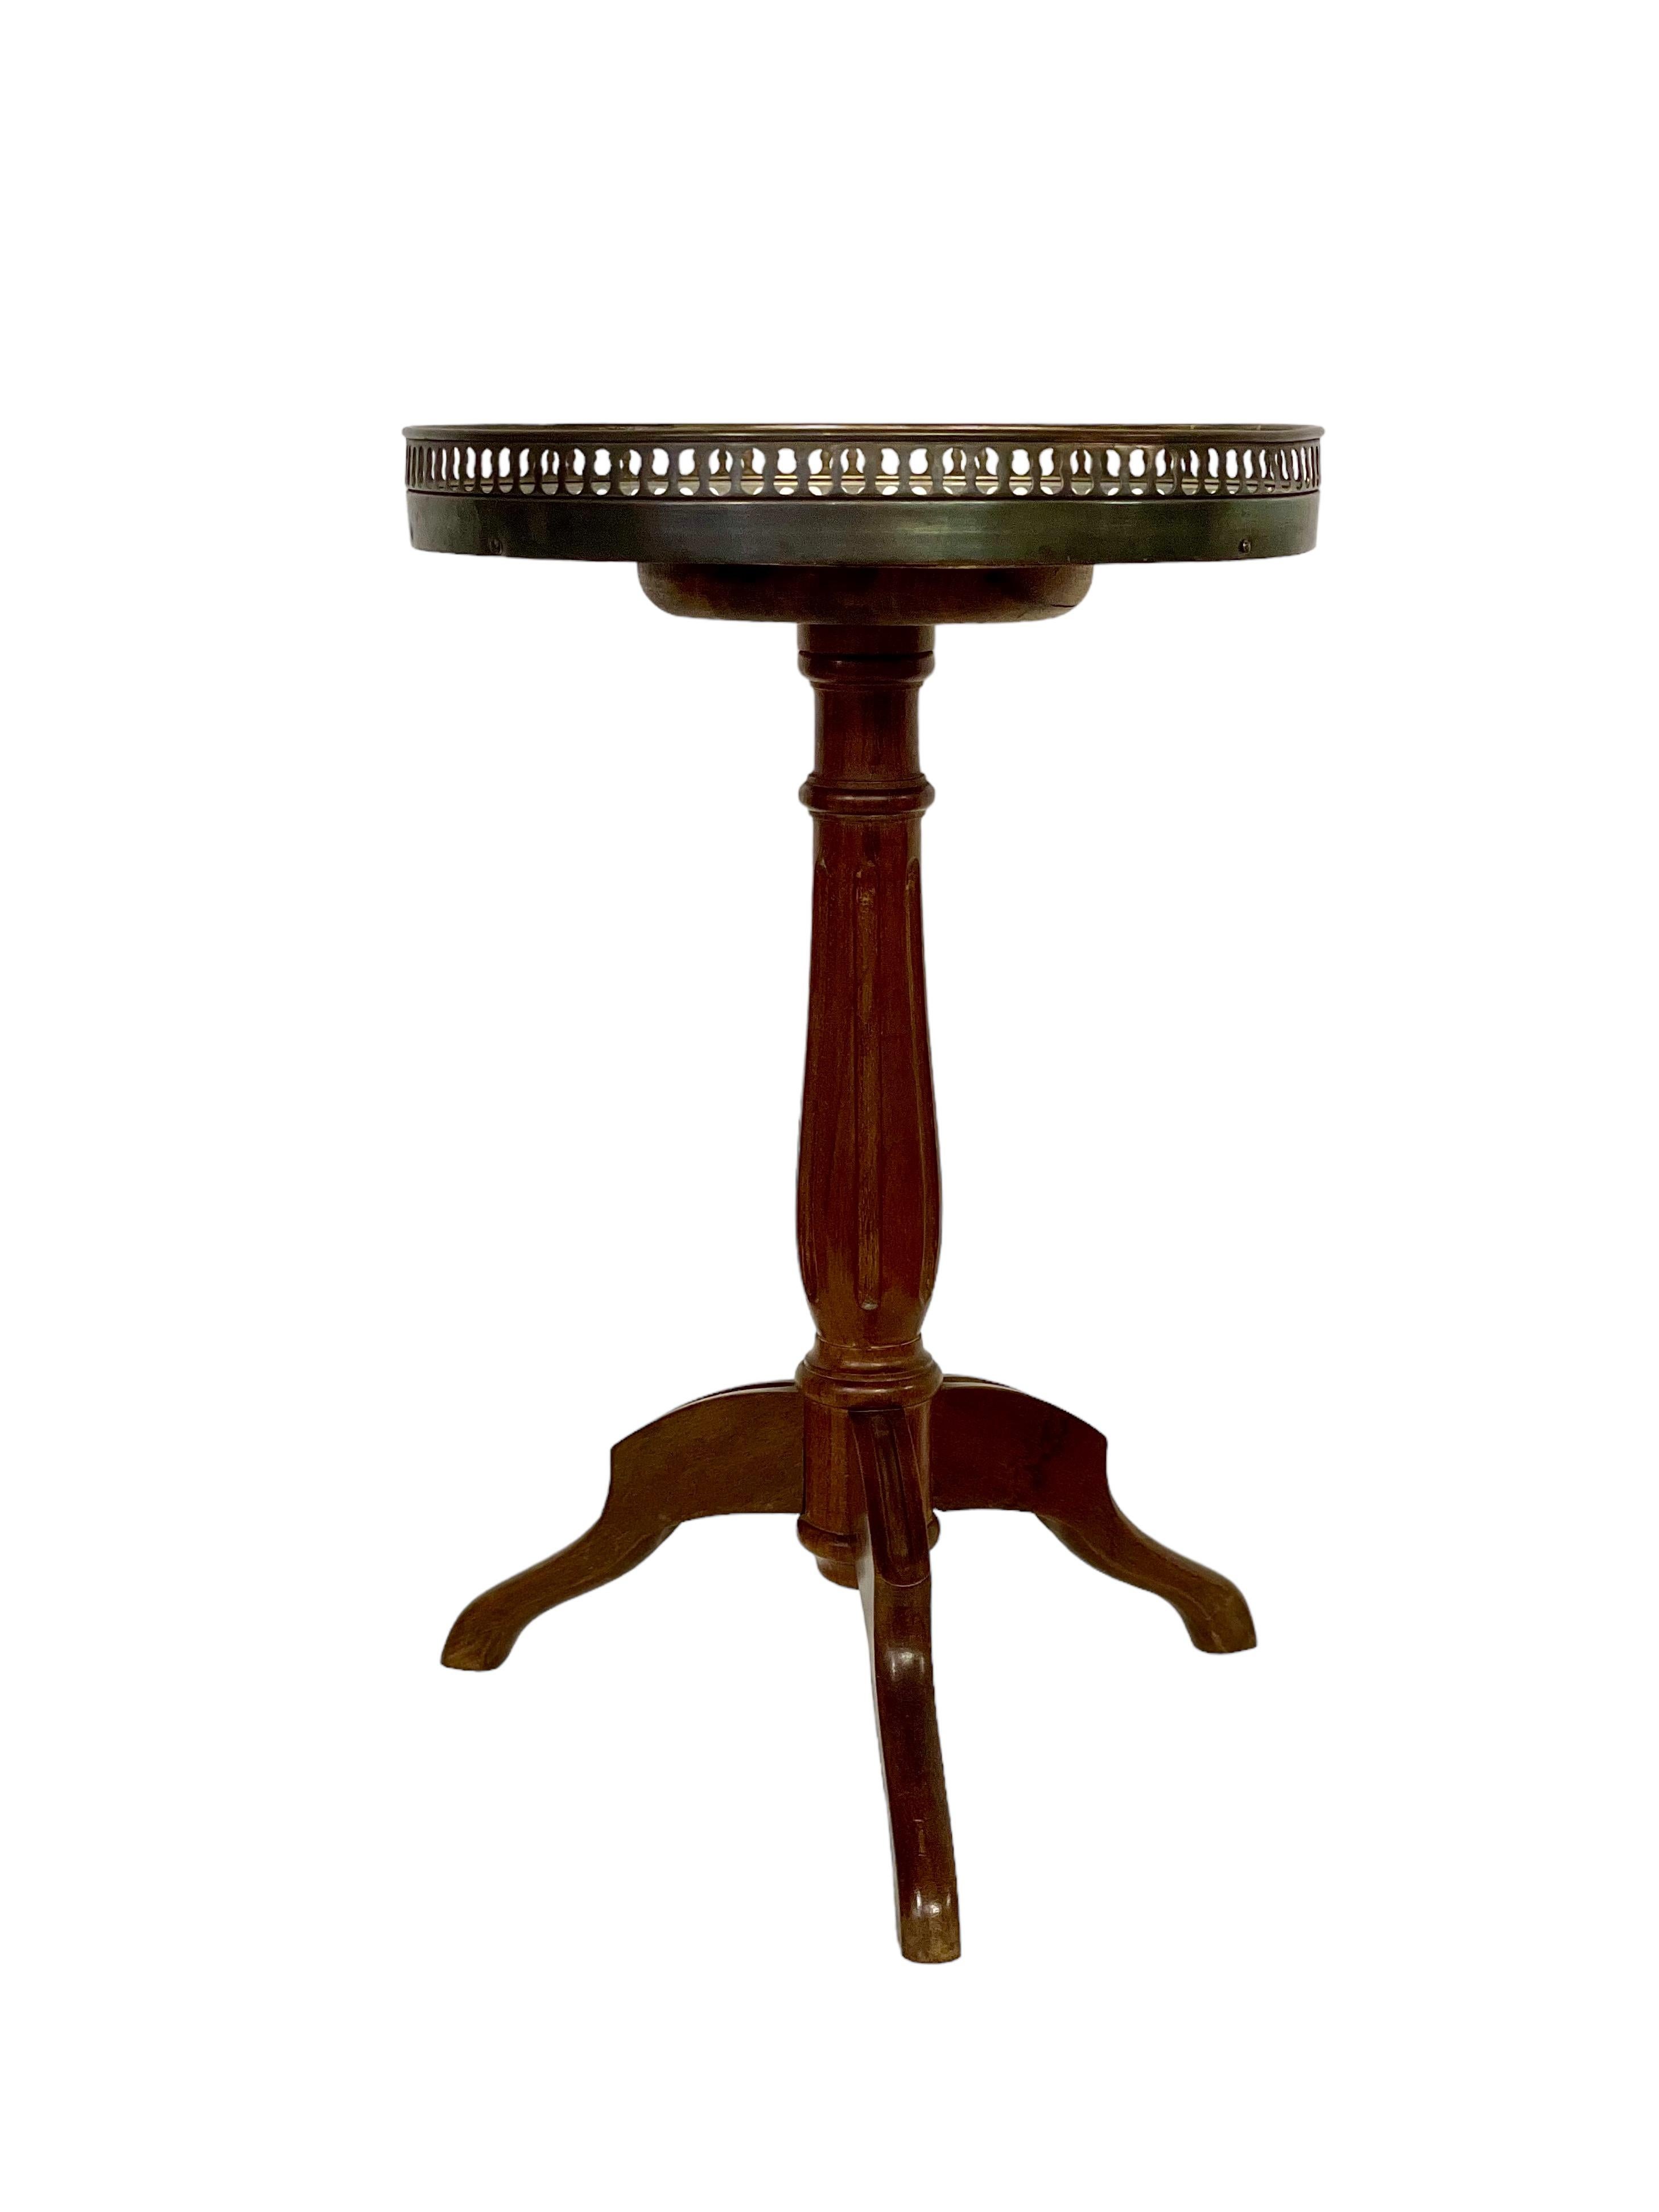 An extremely elegant Louis XVI 'Guéridon' wine table, featuring a rotating top and shaped tripod base. The circular tray is made from cool, polished grey-veined marble, and is edged with a gorgeous pierced bronze openwork gallery – a beautiful and